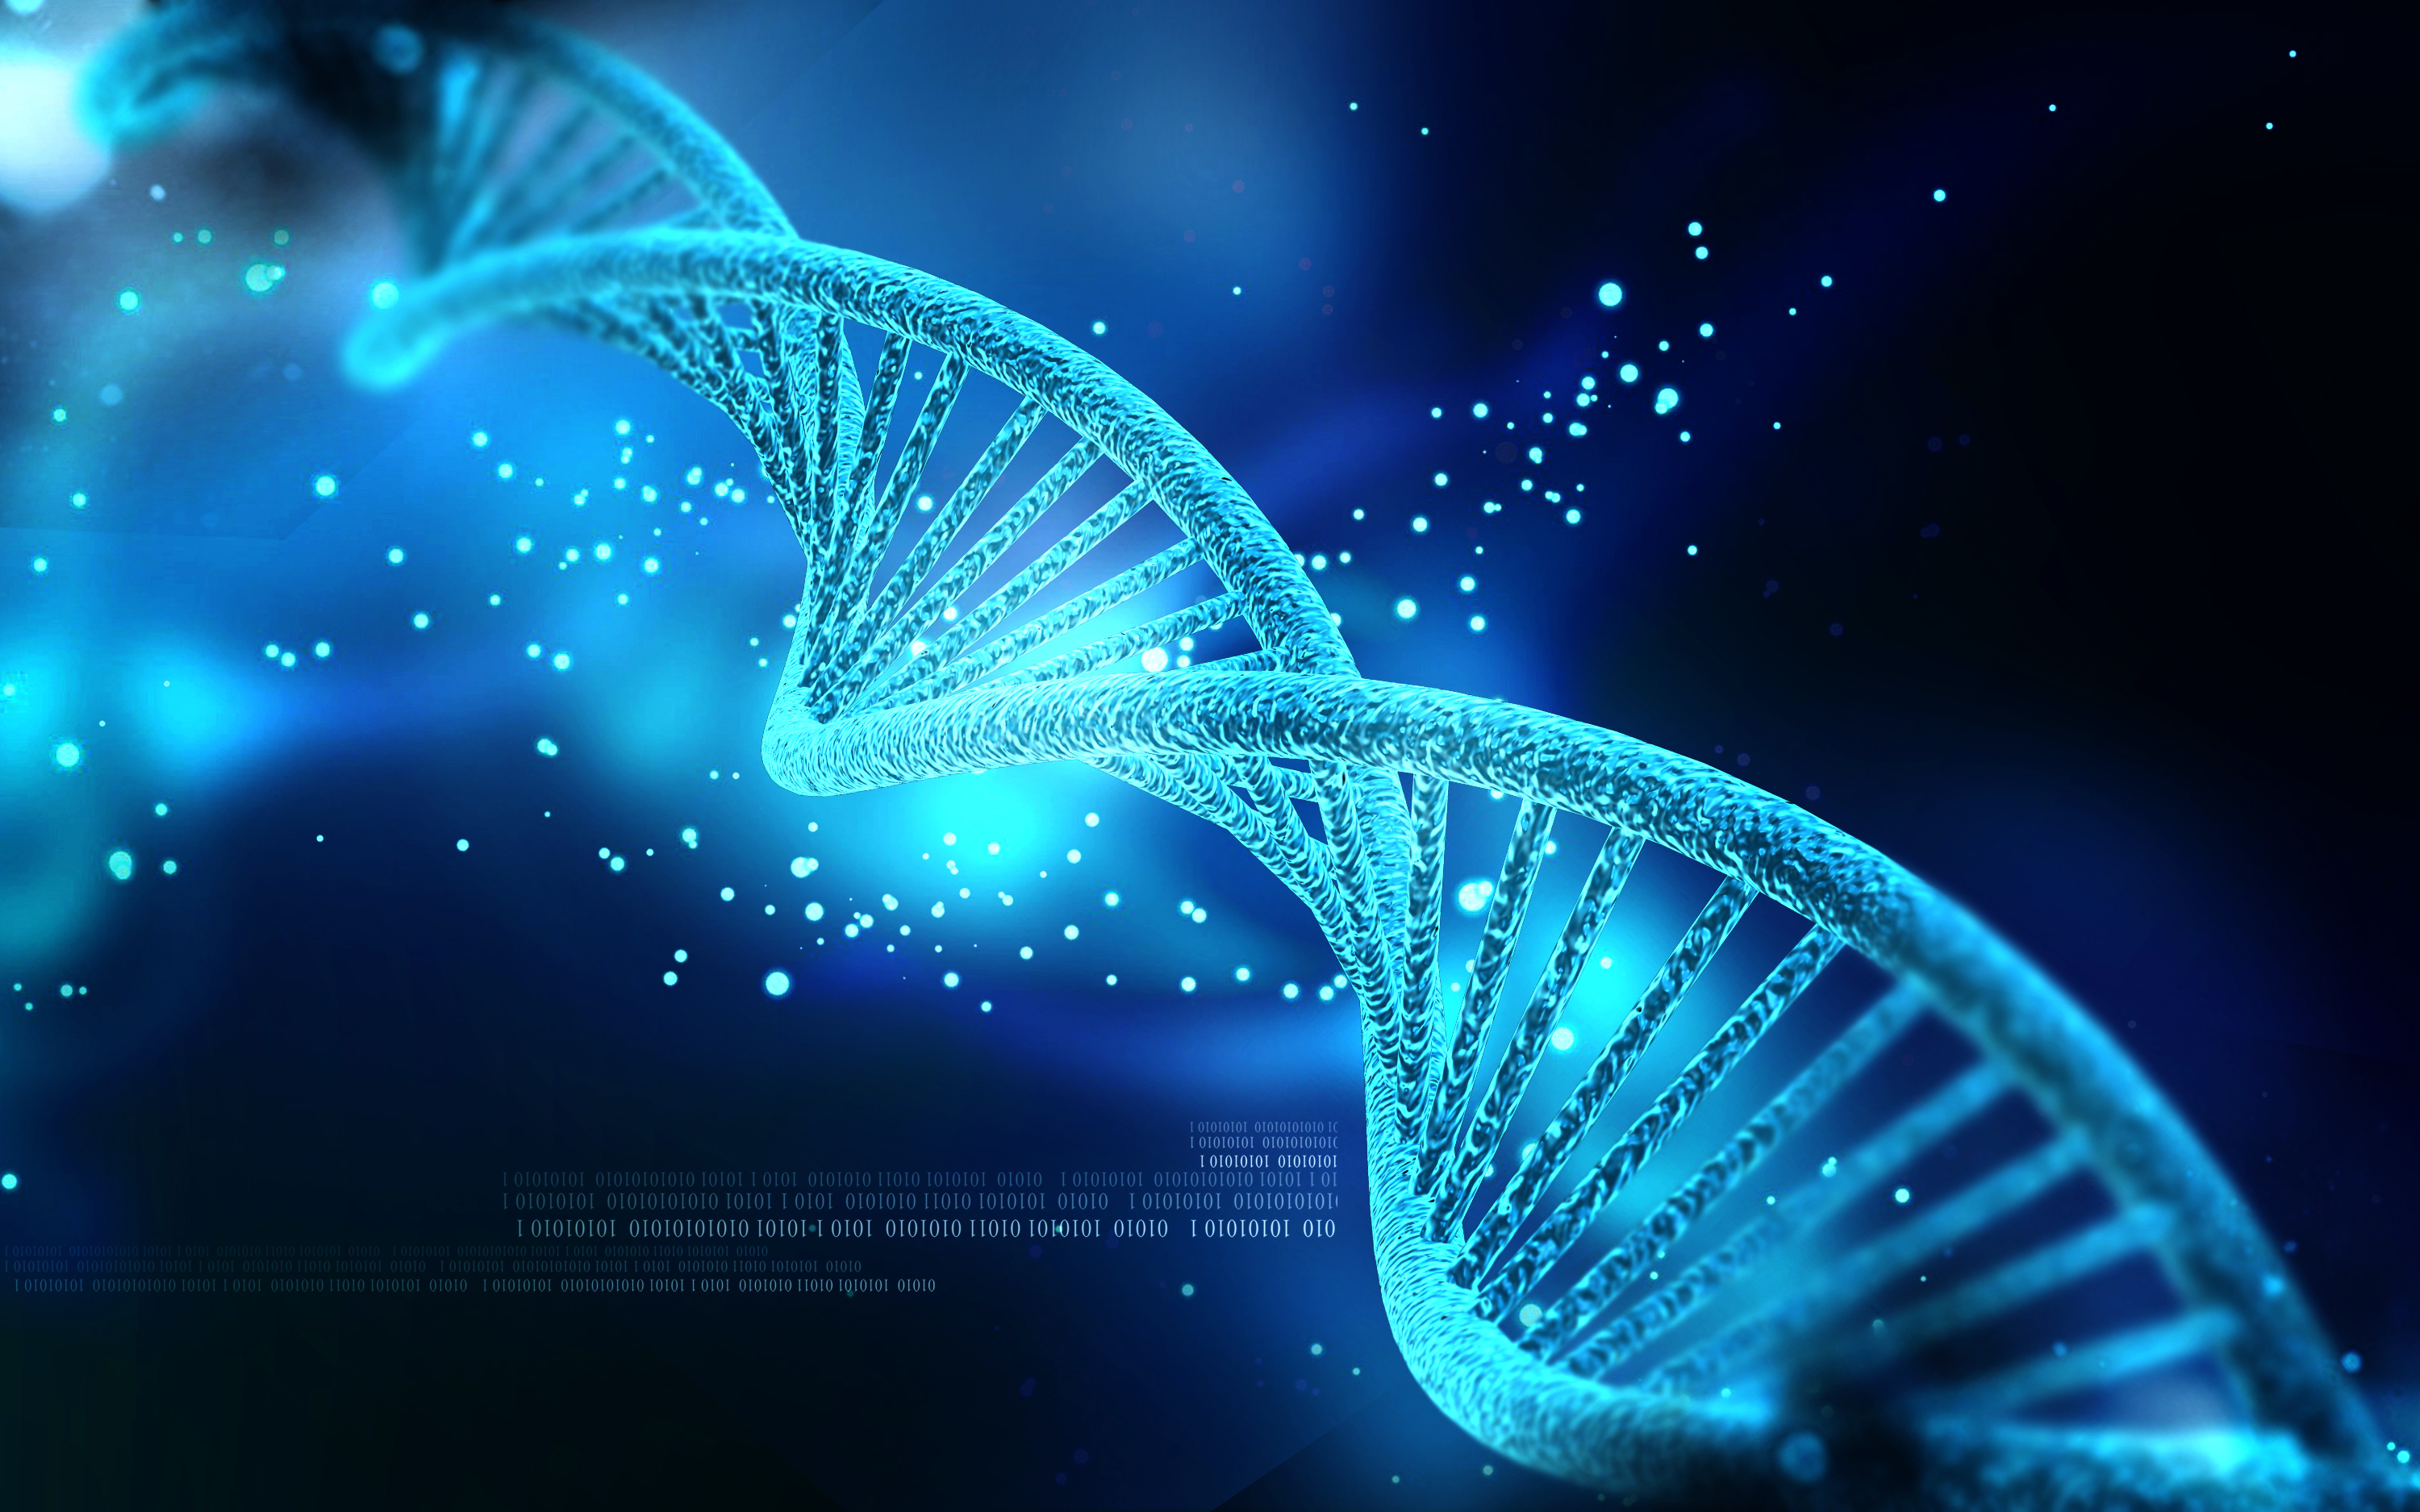 Gene Therapy via Skin Can Cure Diseases